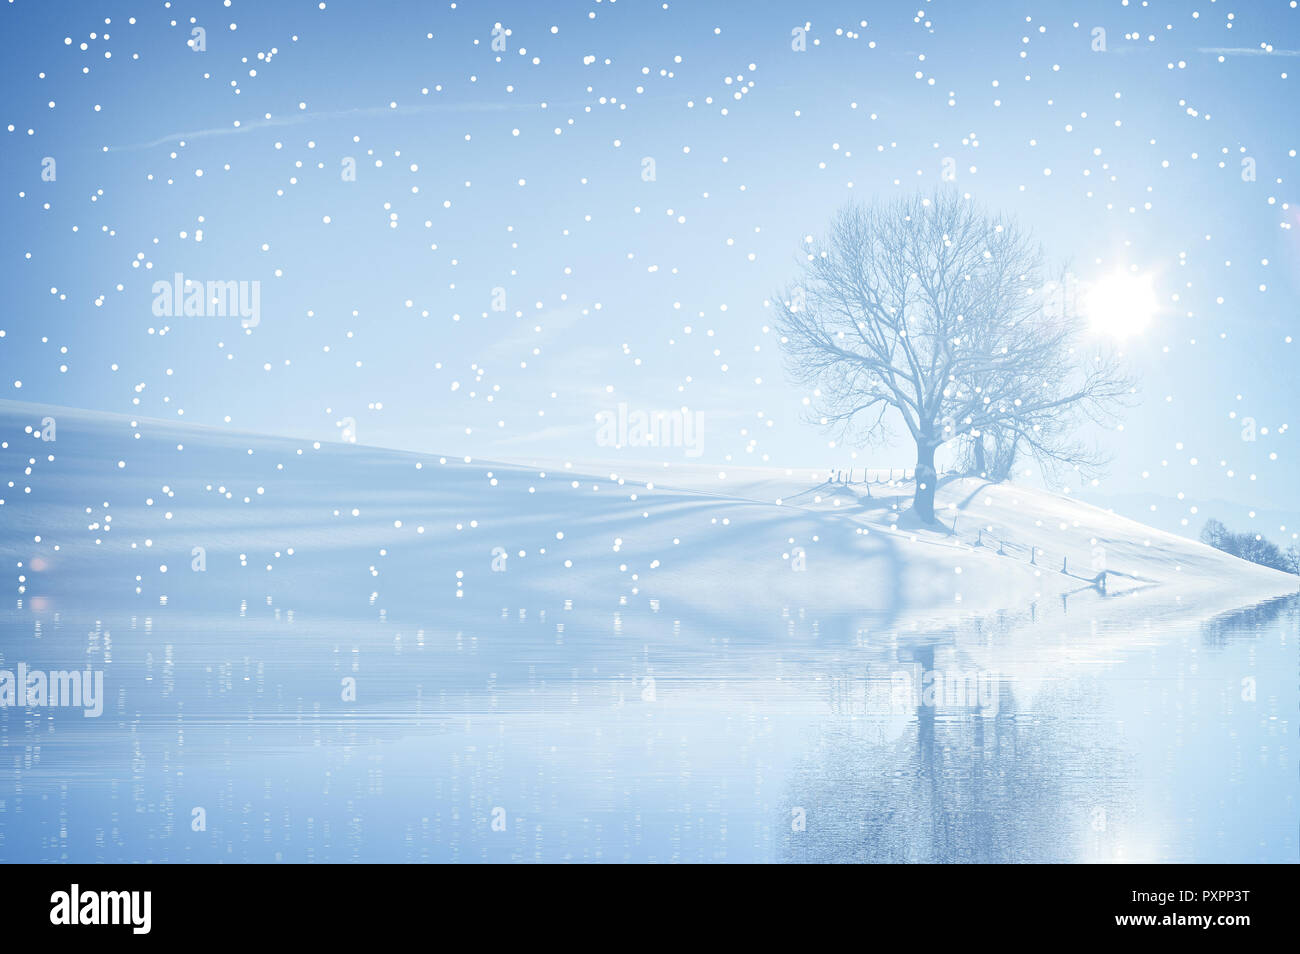 Background for Christmas greeting card with a picture of winter landscape. Stock Photo